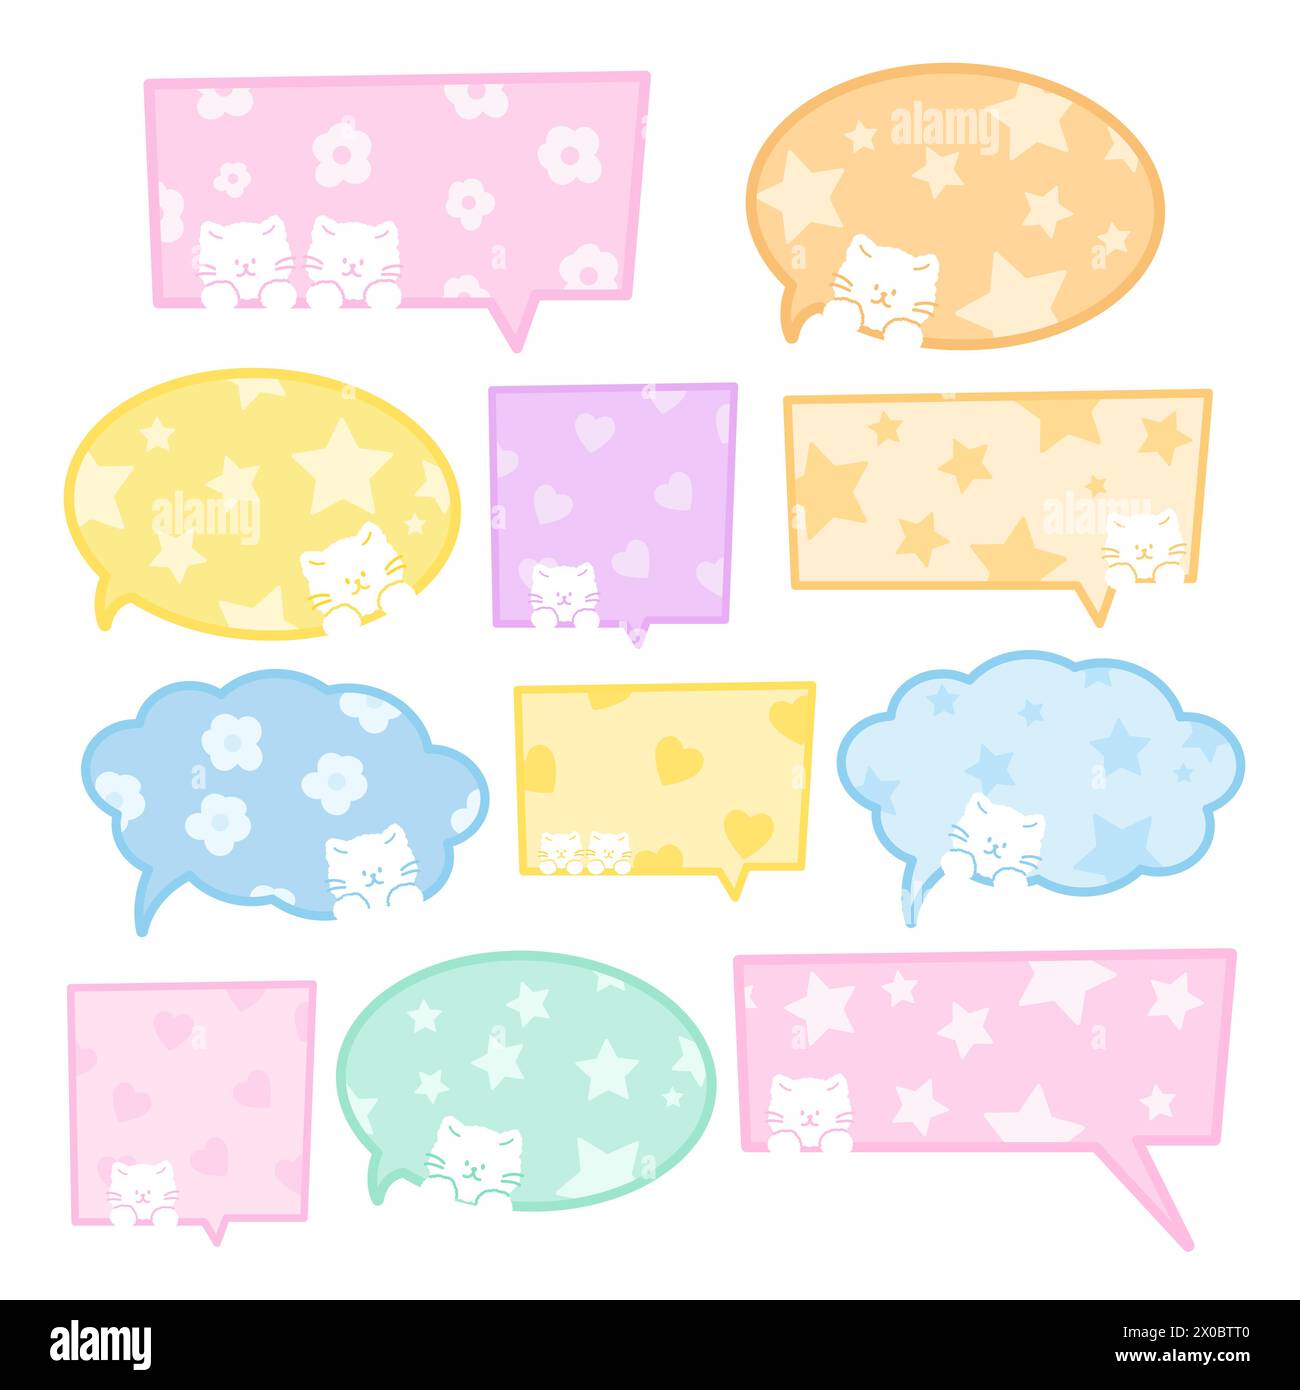 Cute illustration of text bubble with cat for cartoon, comic, manga, message, chat, speech, decoration, print, social media, stickers, communication Stock Vector